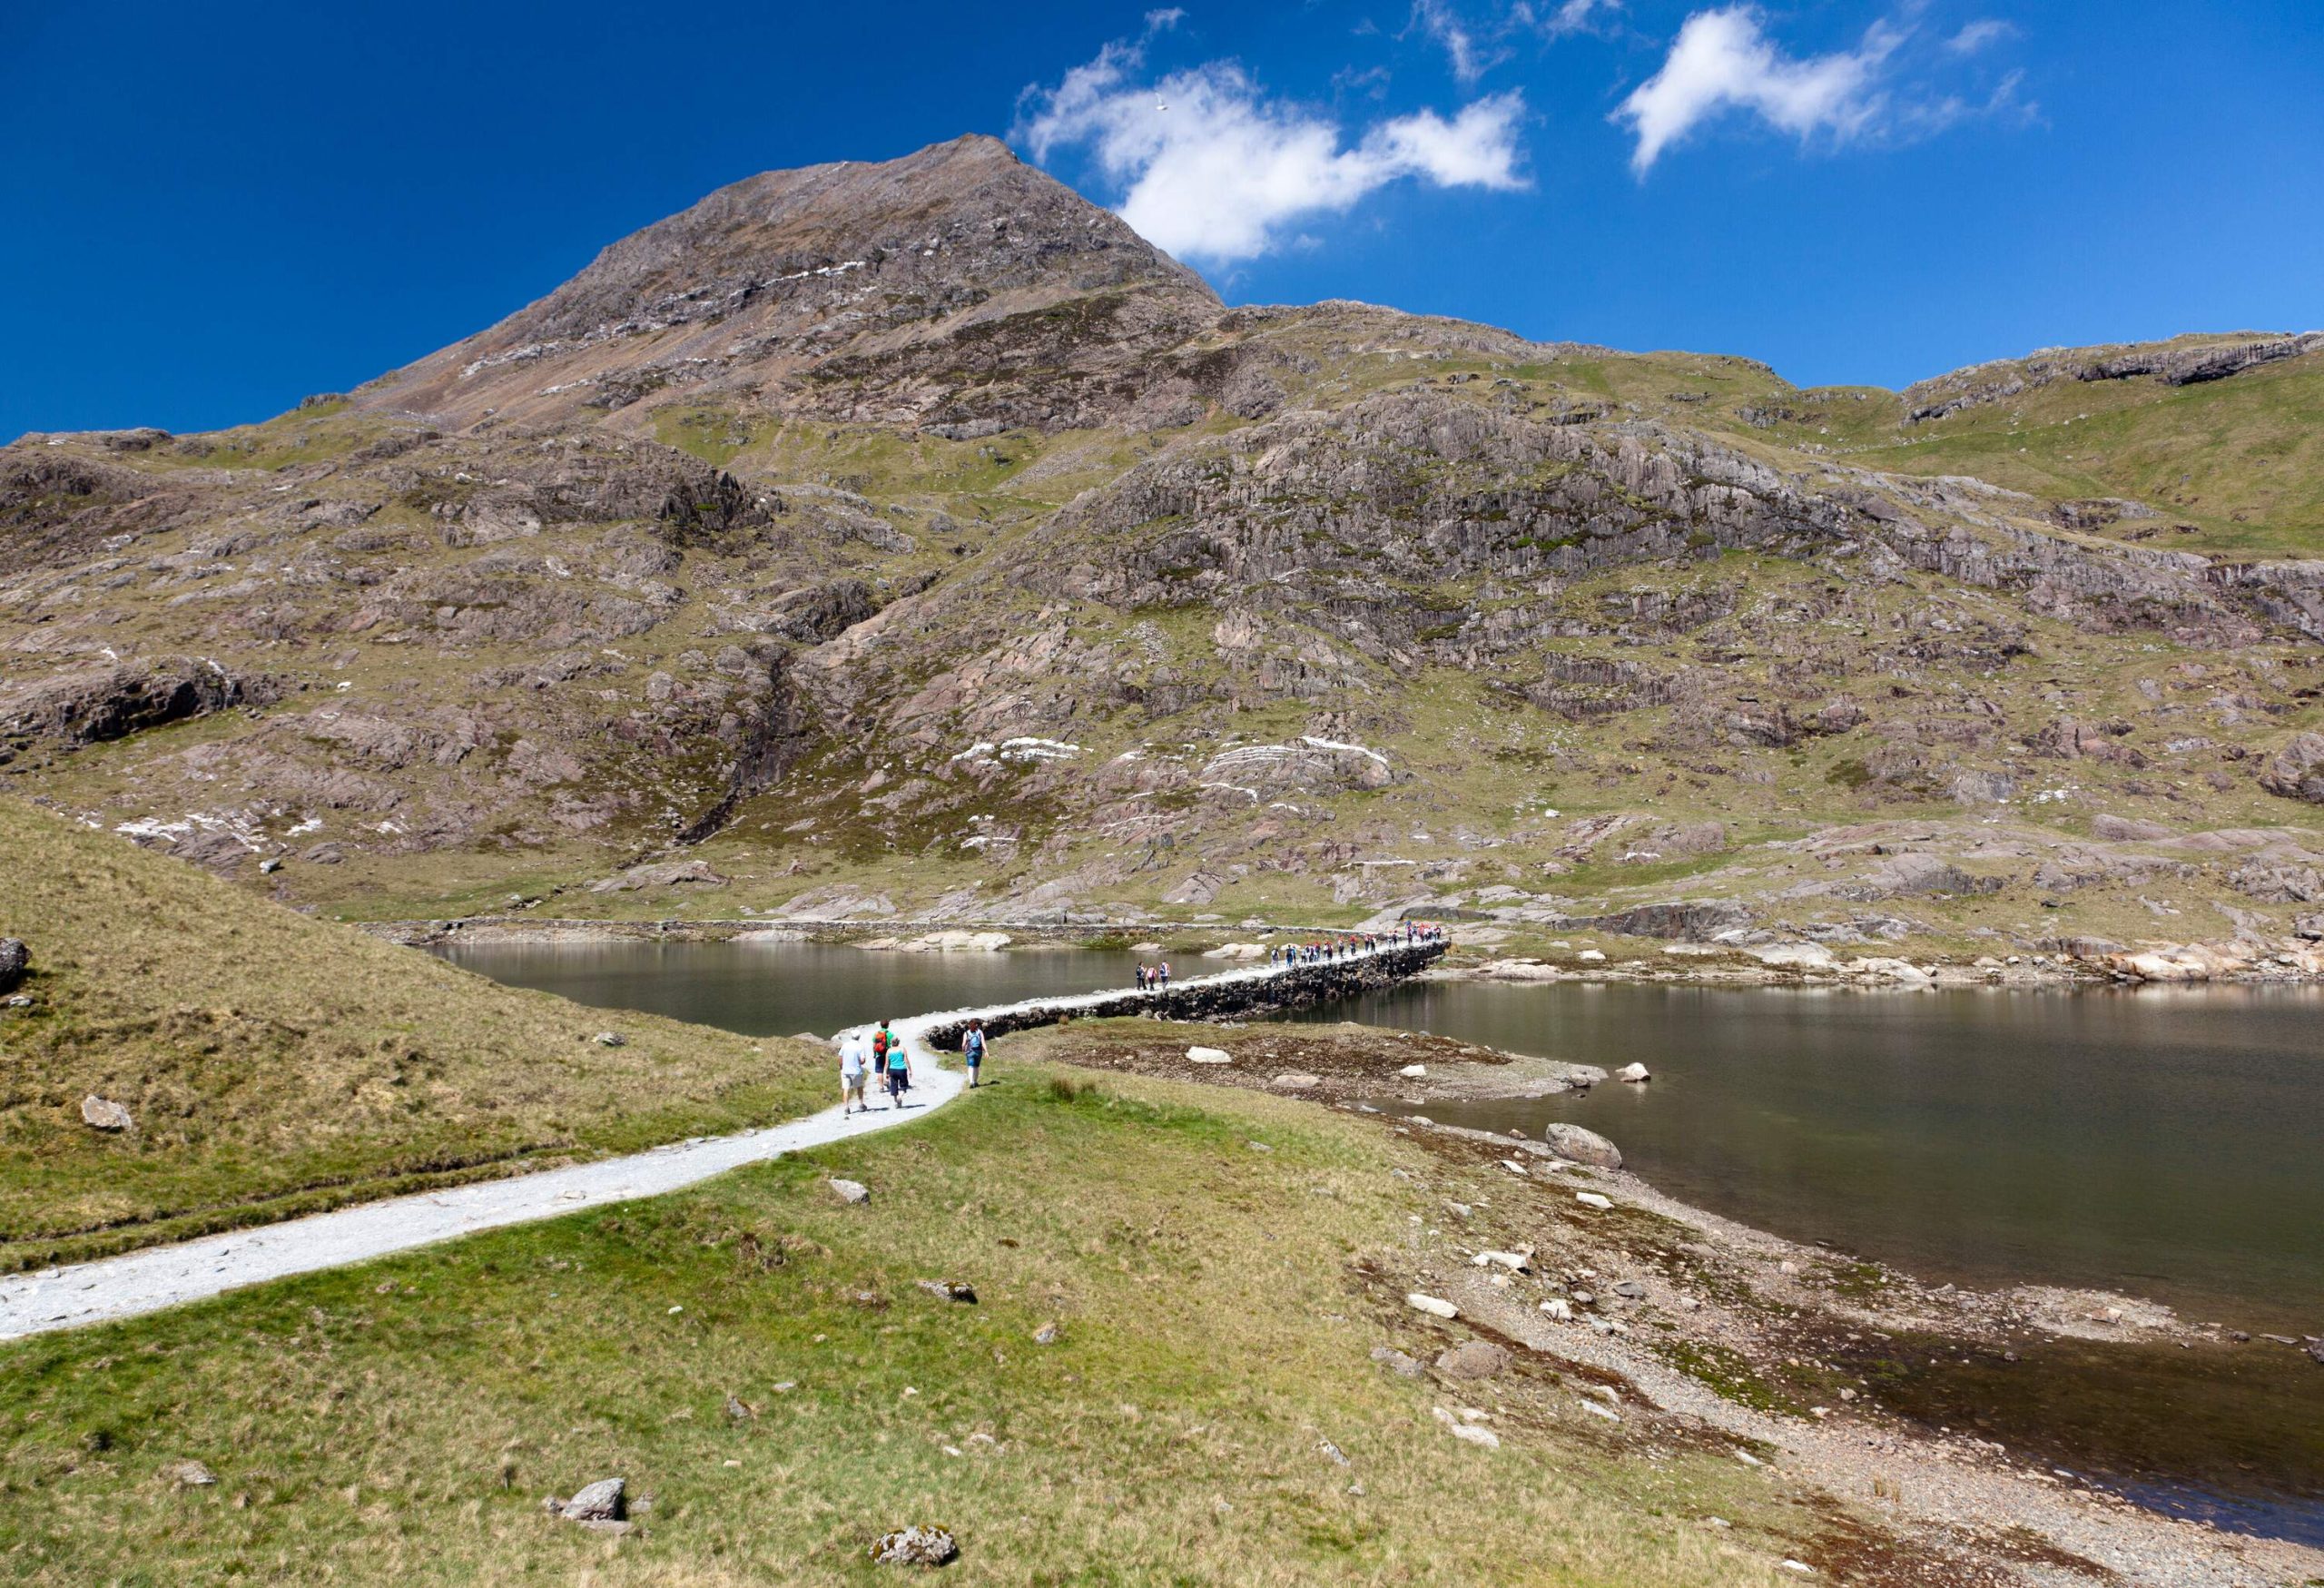 People walking across a footbridge over a lake flowing through the mountains.